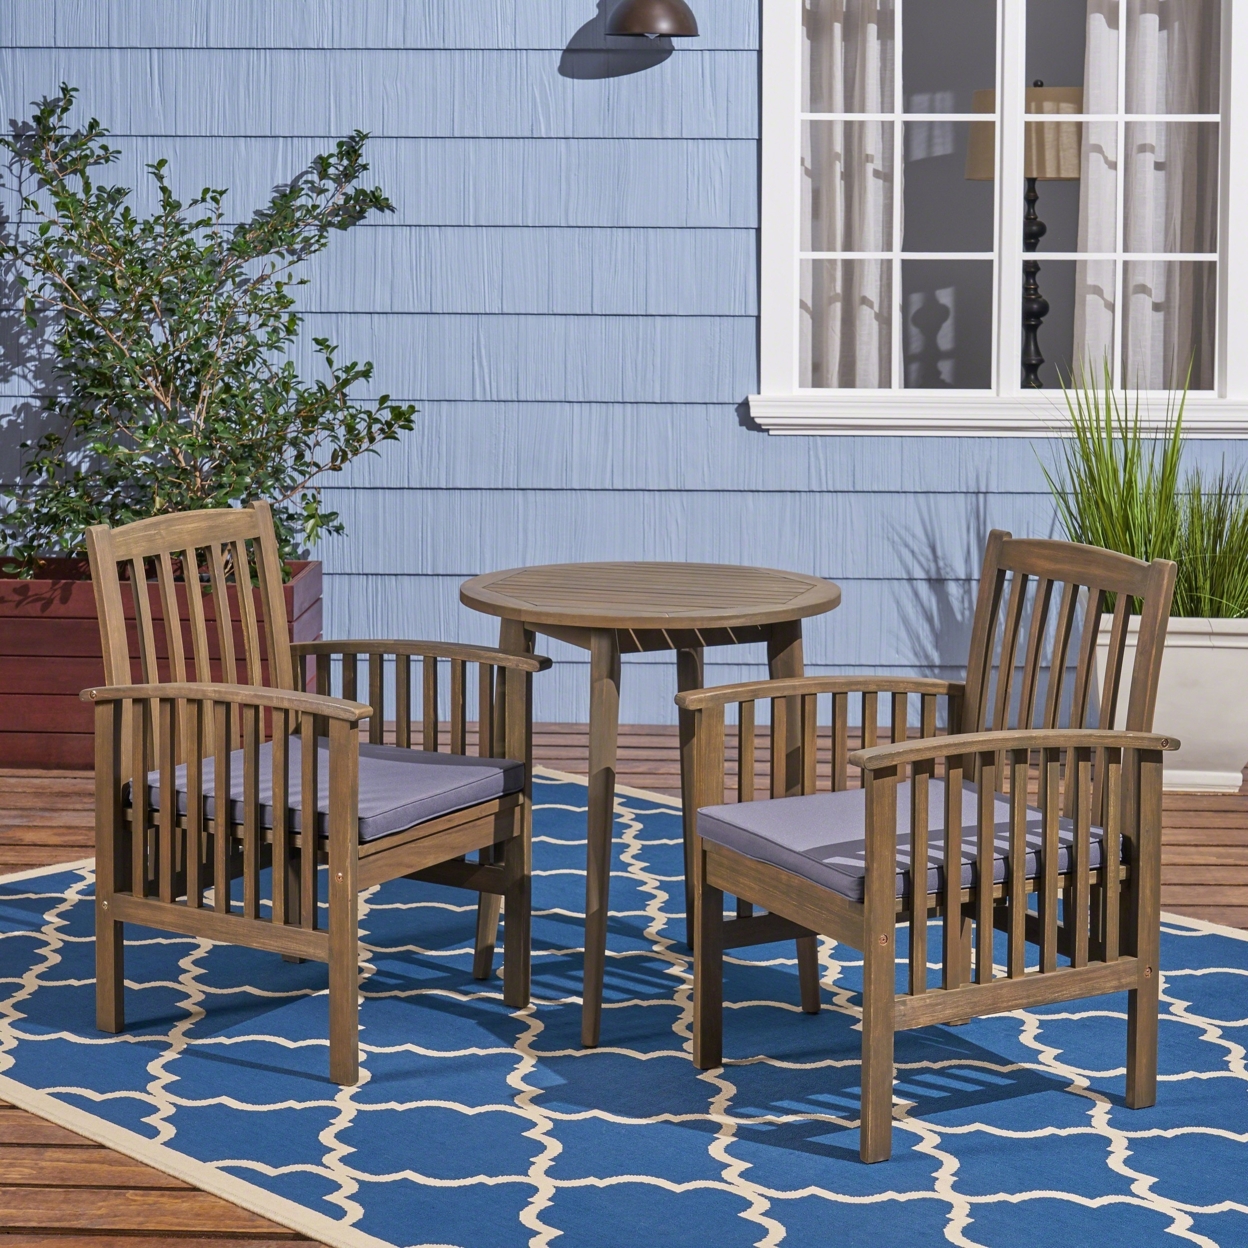 Phoenix Outdoor Acacia 2-Seater Bistro Set With Cushions And 28 Round Table With Straight Legs - Teak Finish + Cream